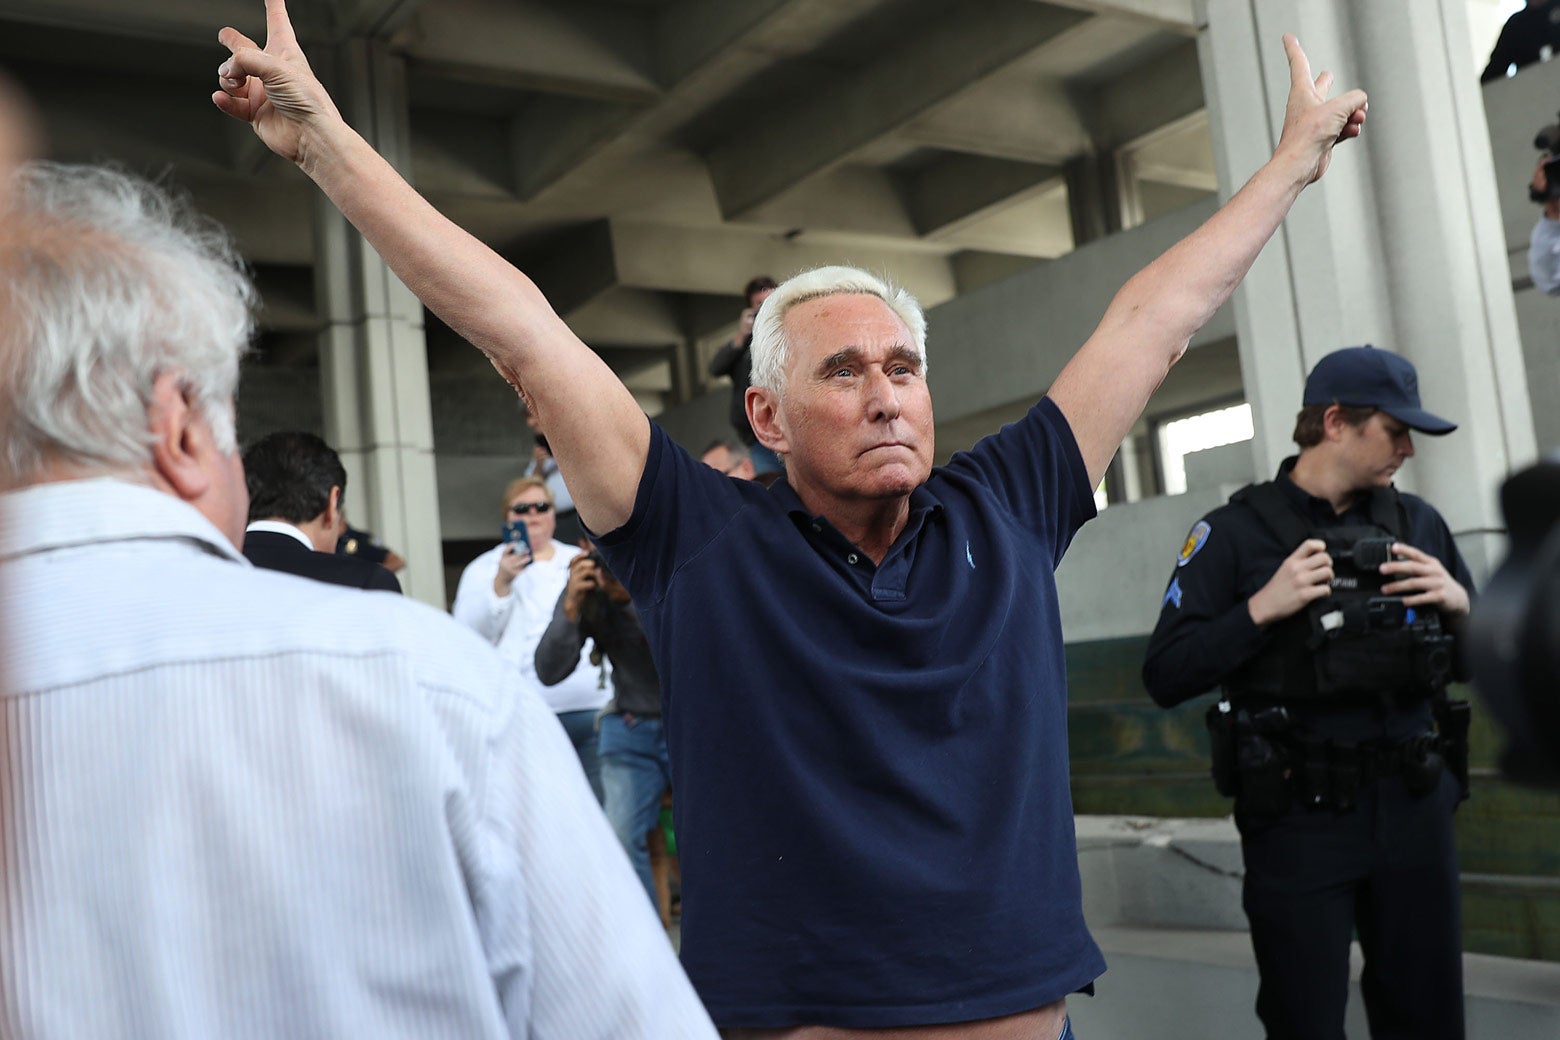 Roger Stone leaves the courthouse with both arms raised in a Nixon salute.